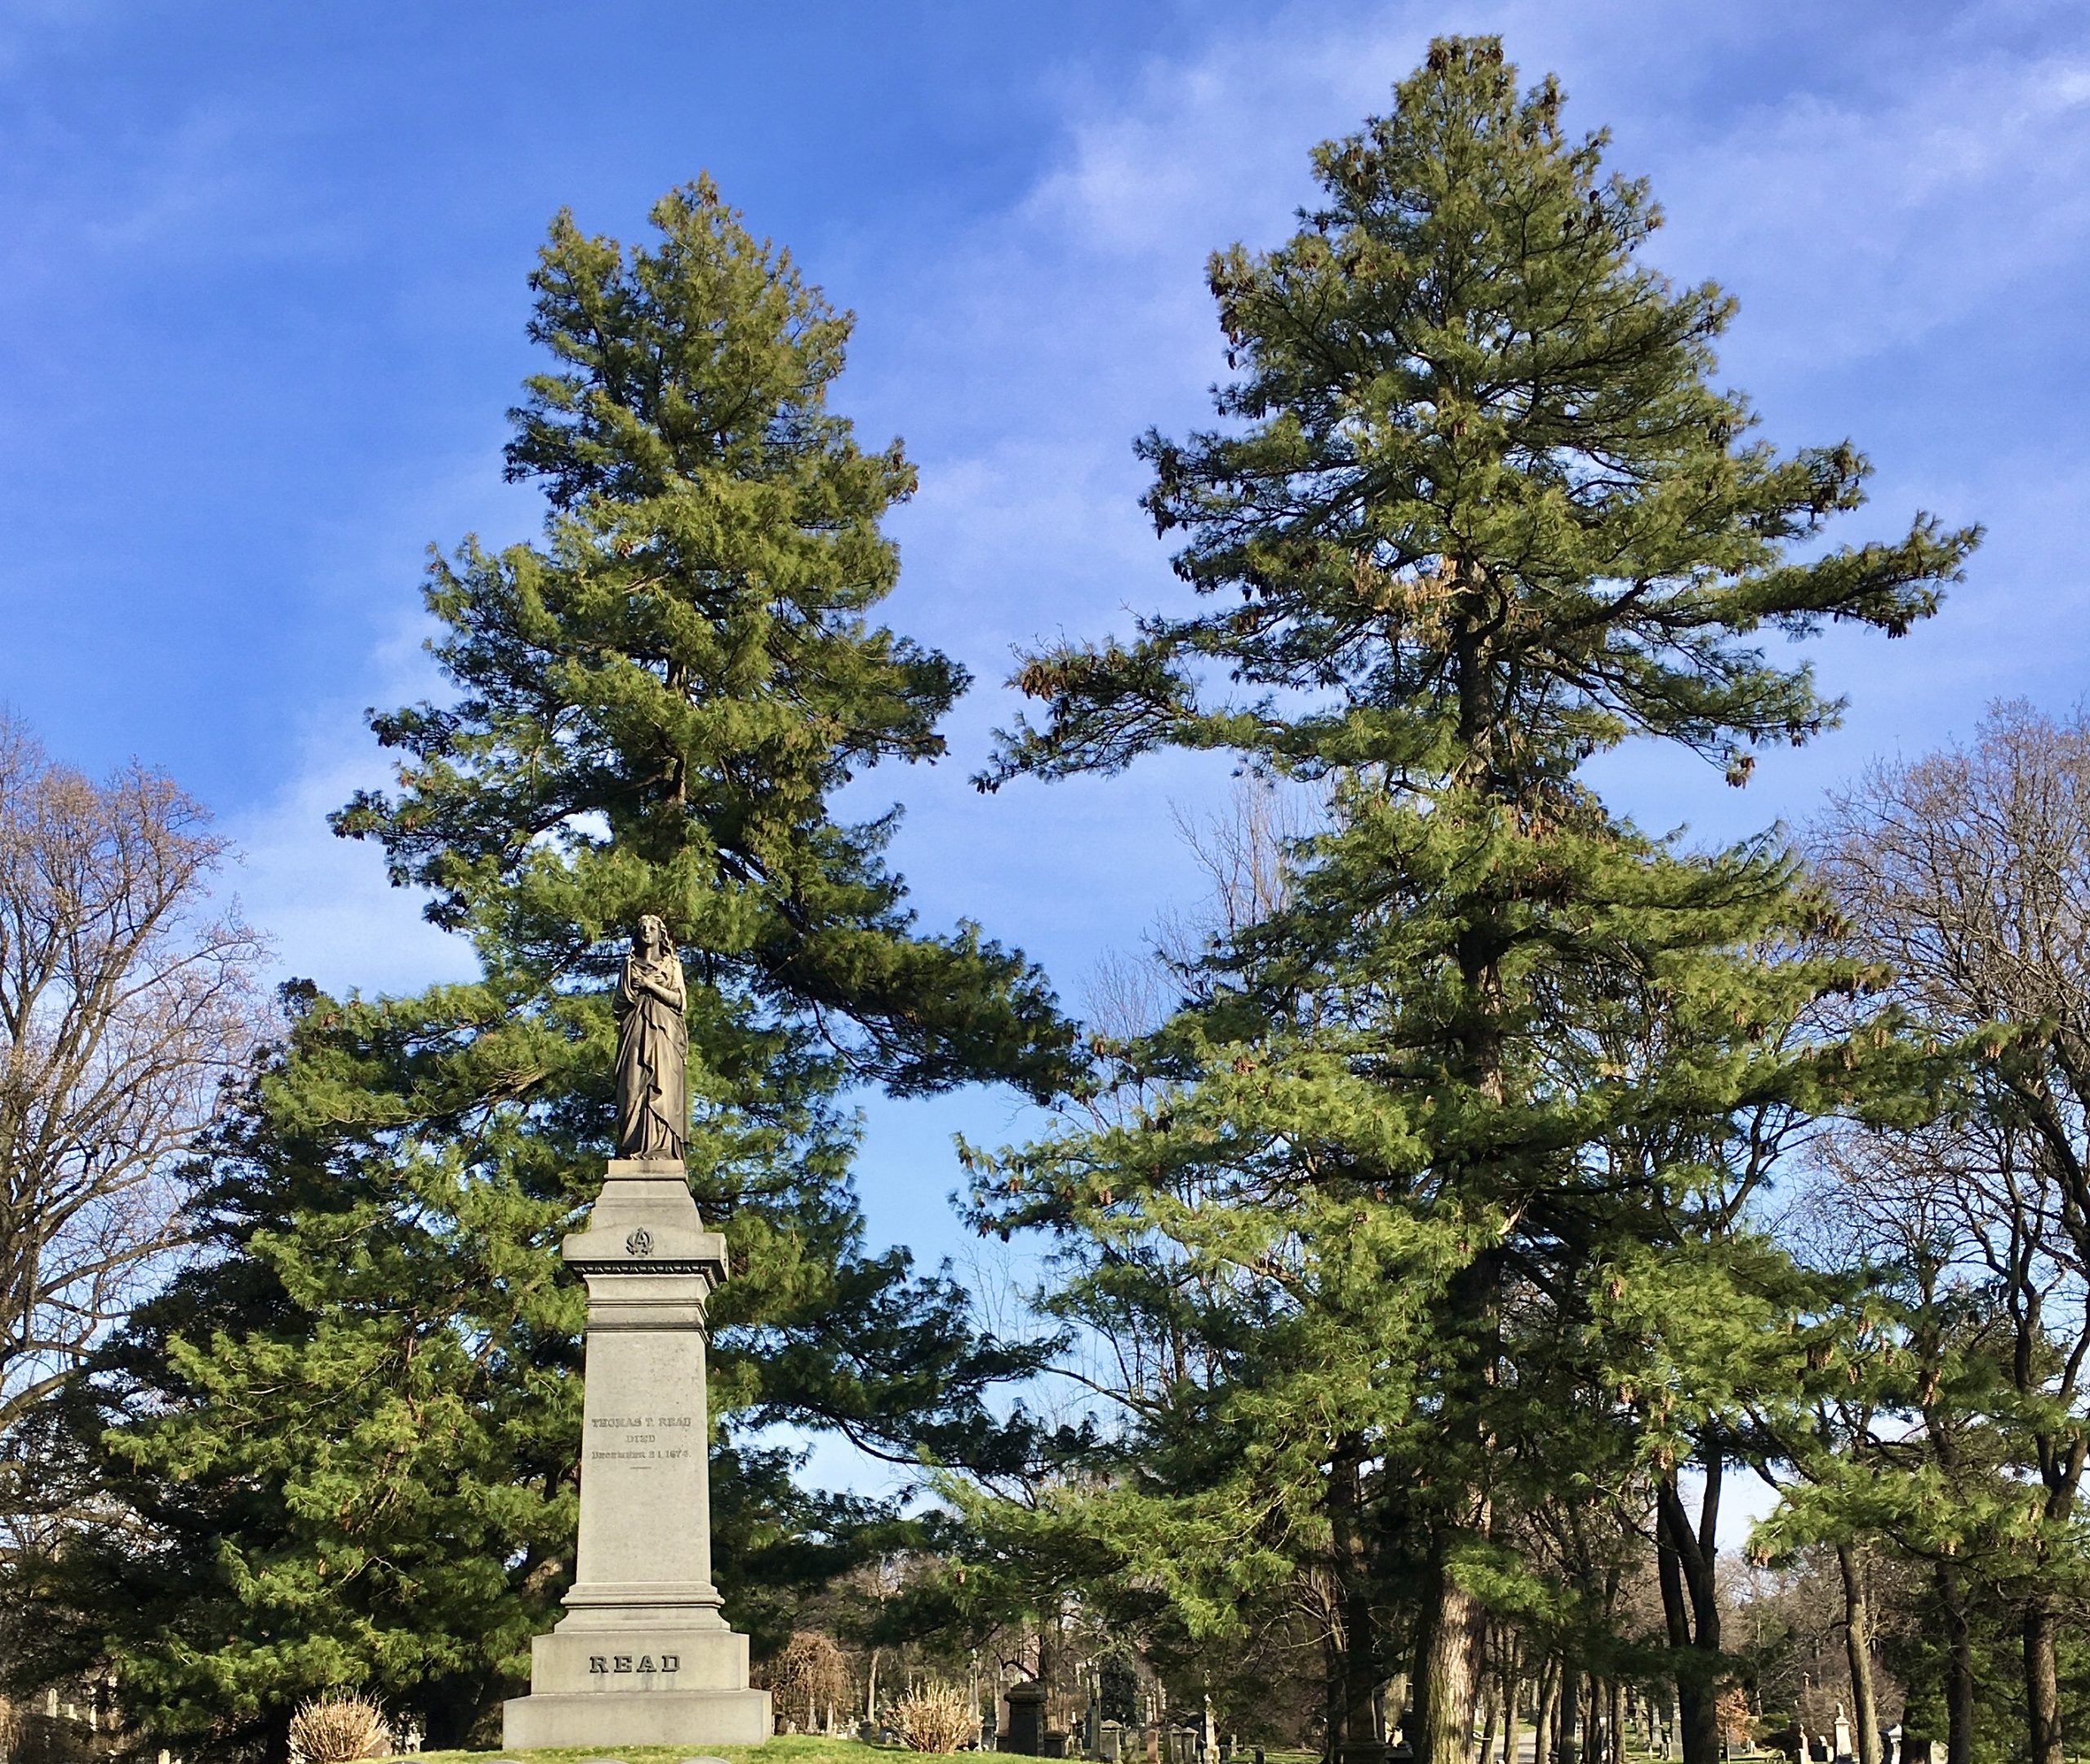 The trees behind Thomas T. Read’s monument are tremendously tall. Photo: Lore Croghan/Brooklyn Eagle